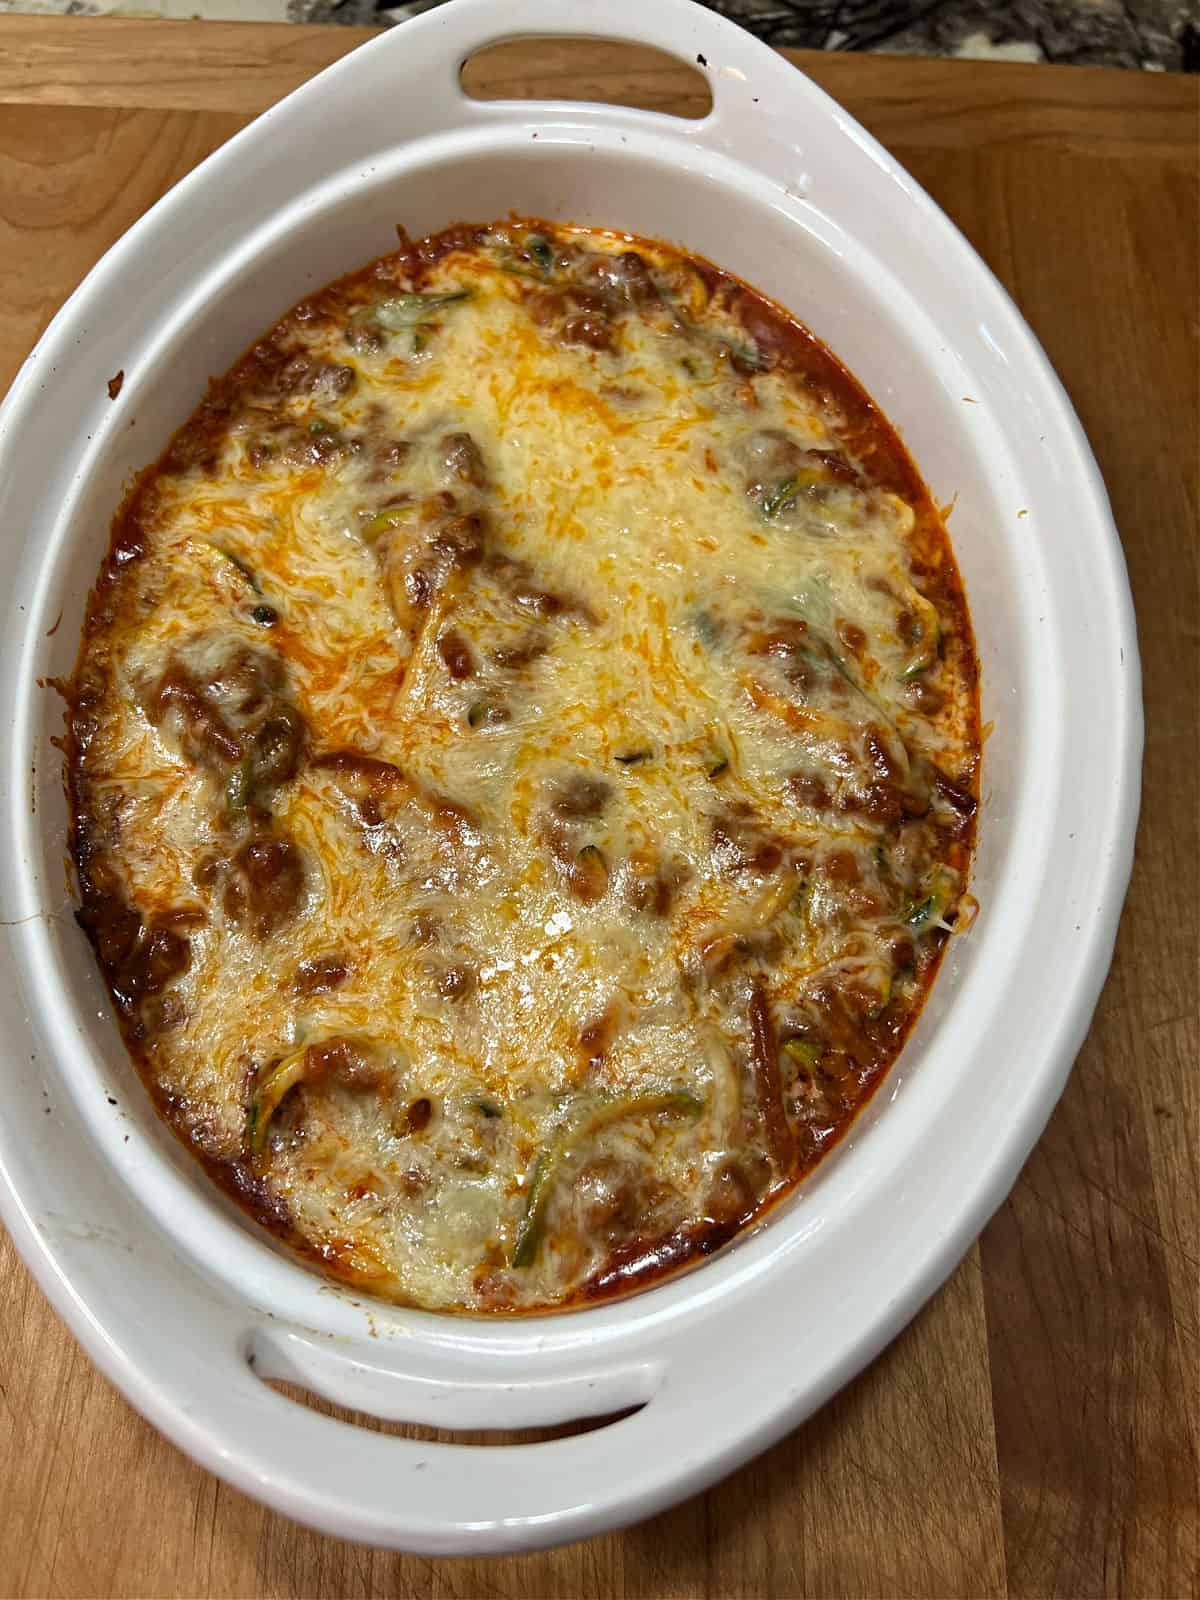 Baked spaghetti casserole showing melted cheese on top.